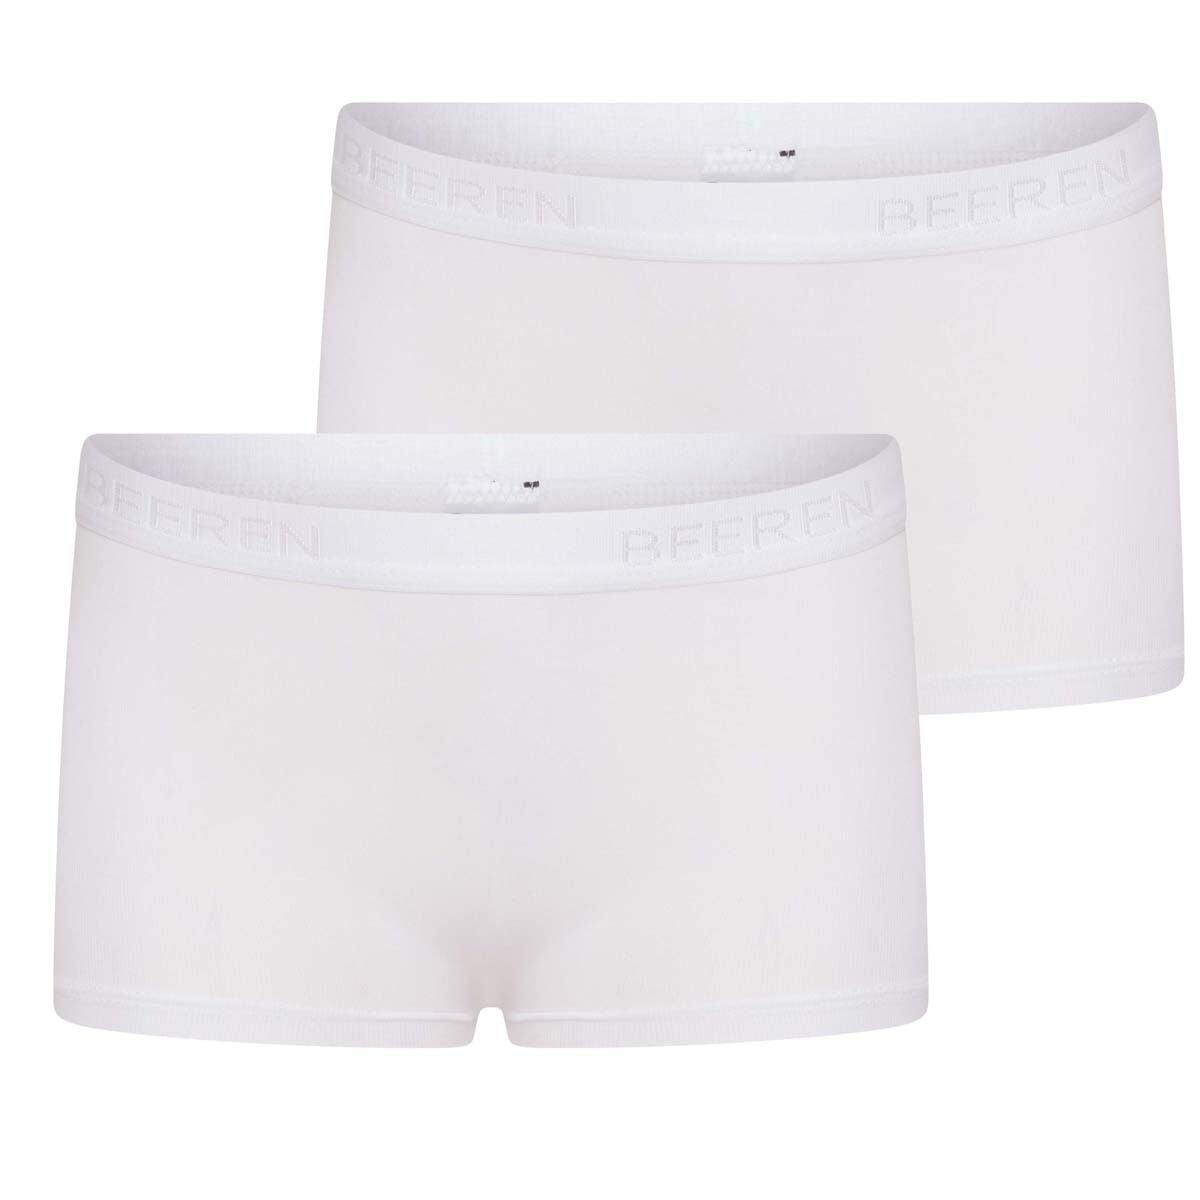 (21-453) Meisjes boxer 2-pack Young wit 176/188